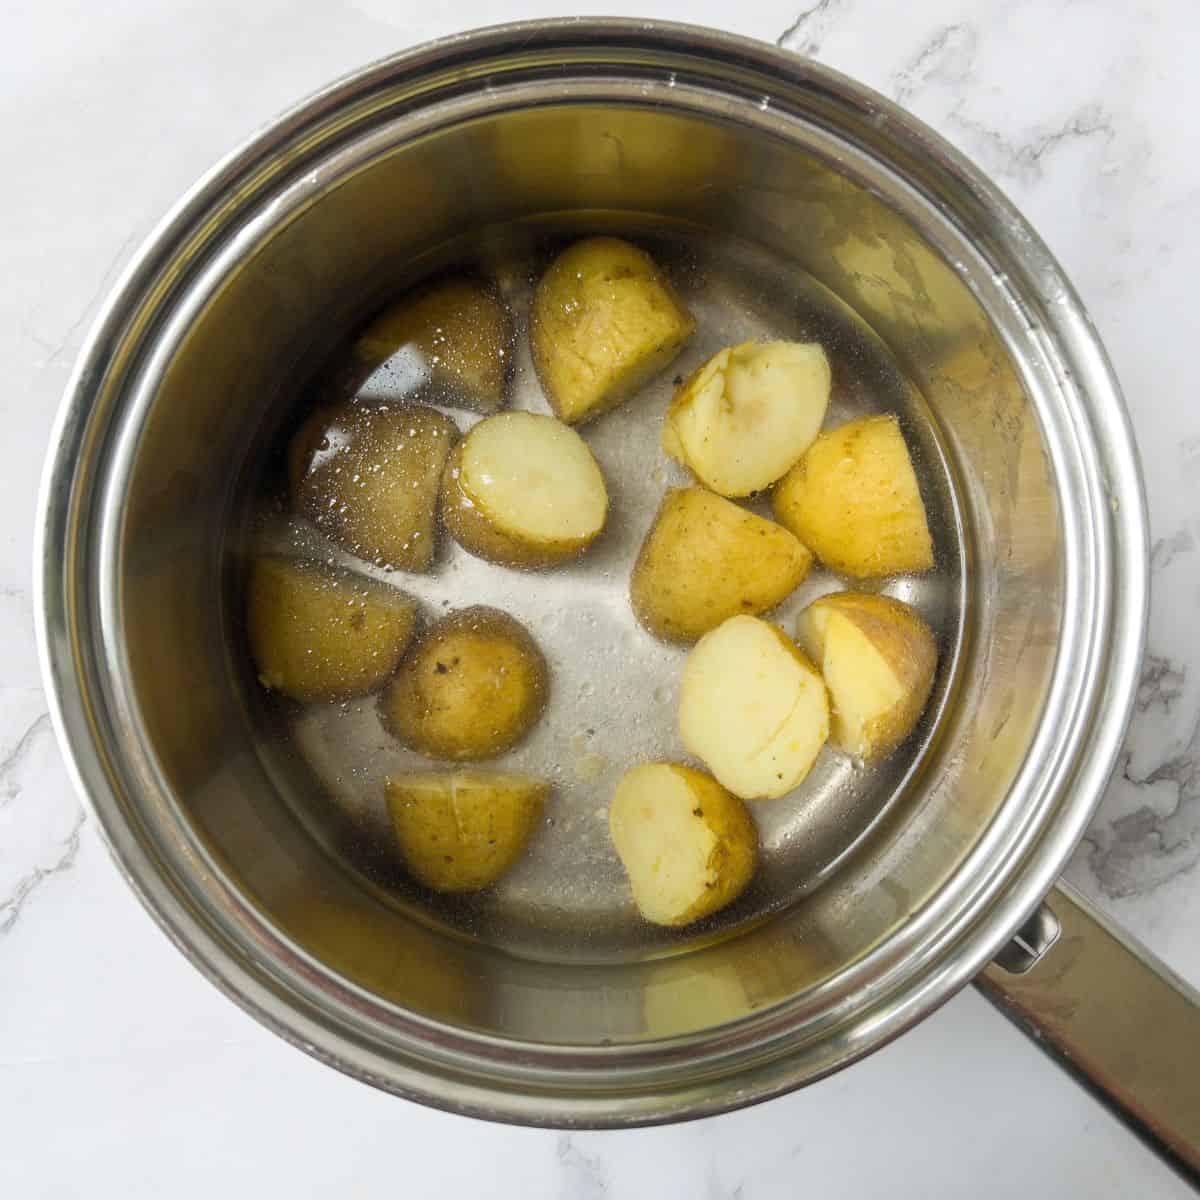 New potatoes boiling in water in a saucepan.